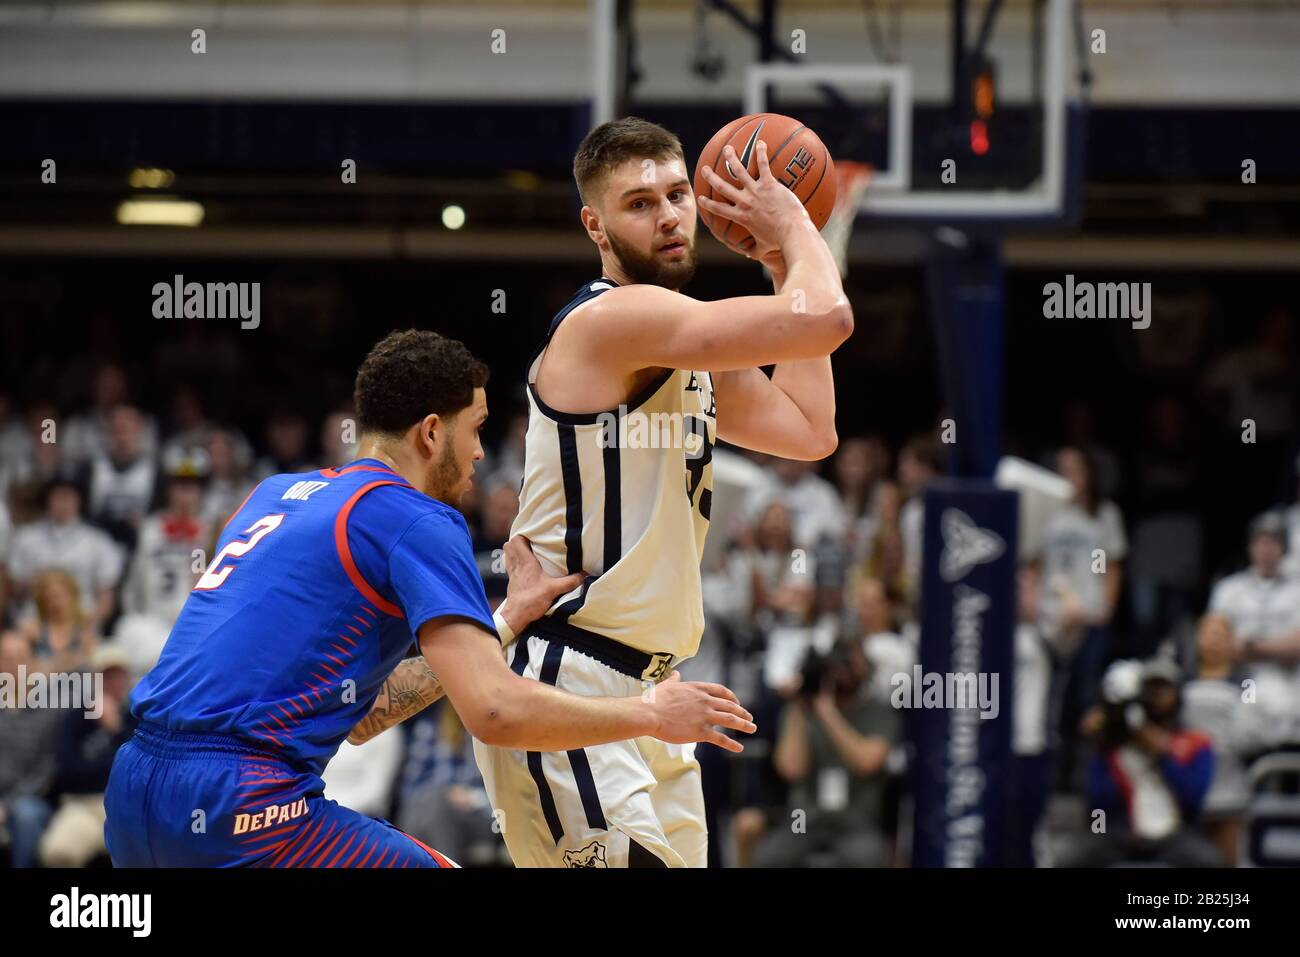 Indianapolis, Indiana, USA. 29th Feb, 2020. Butler Bulldogs forward BRYCE GOLDEN (33) holds the ball at the top of the key as he is defended by DePaul Blue Demons forward JAYLEN BUTZ (2) at Hinkle Fieldhouse in Indianapolis. Credit: Richard Sitler/ZUMA Wire/Alamy Live News Stock Photo